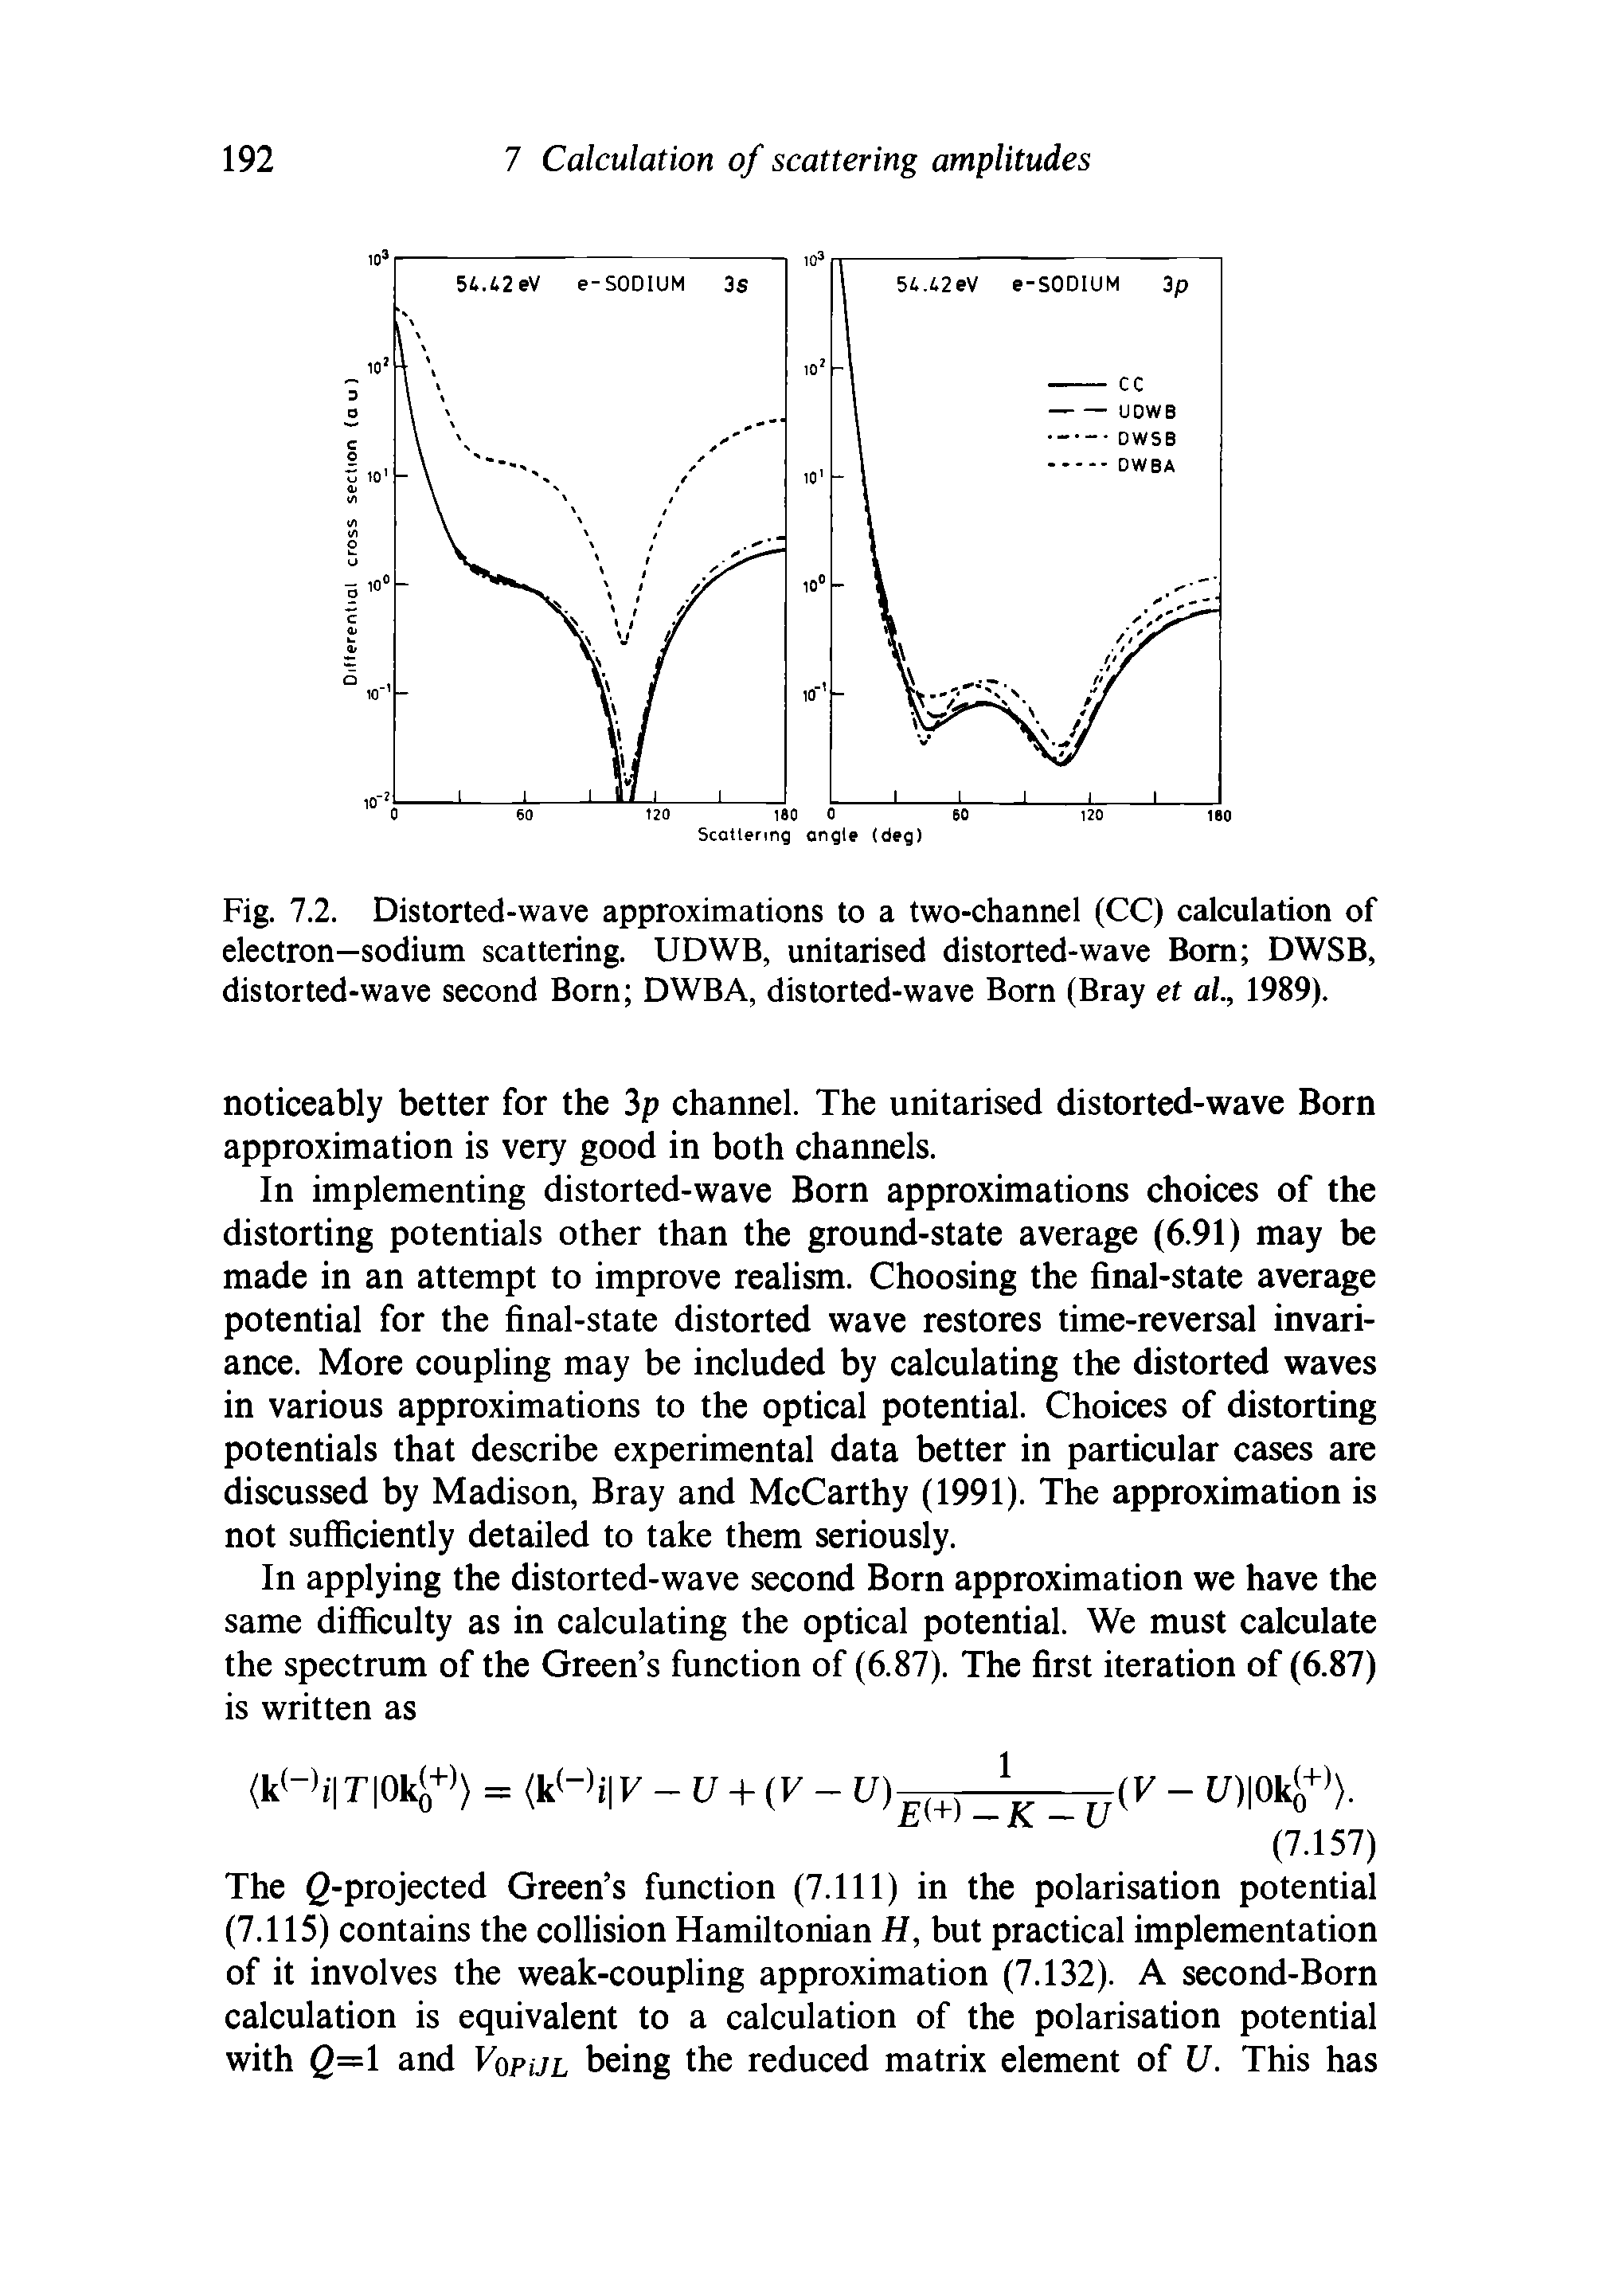 Fig. 7.2. Distorted-wave approximations to a two-channel (CC) calculation of electron—sodium scattering. UDWB, unitarised distorted-wave Bom DWSB, distorted-wave second Born DWBA, distorted-wave Born (Bray et al., 1989).